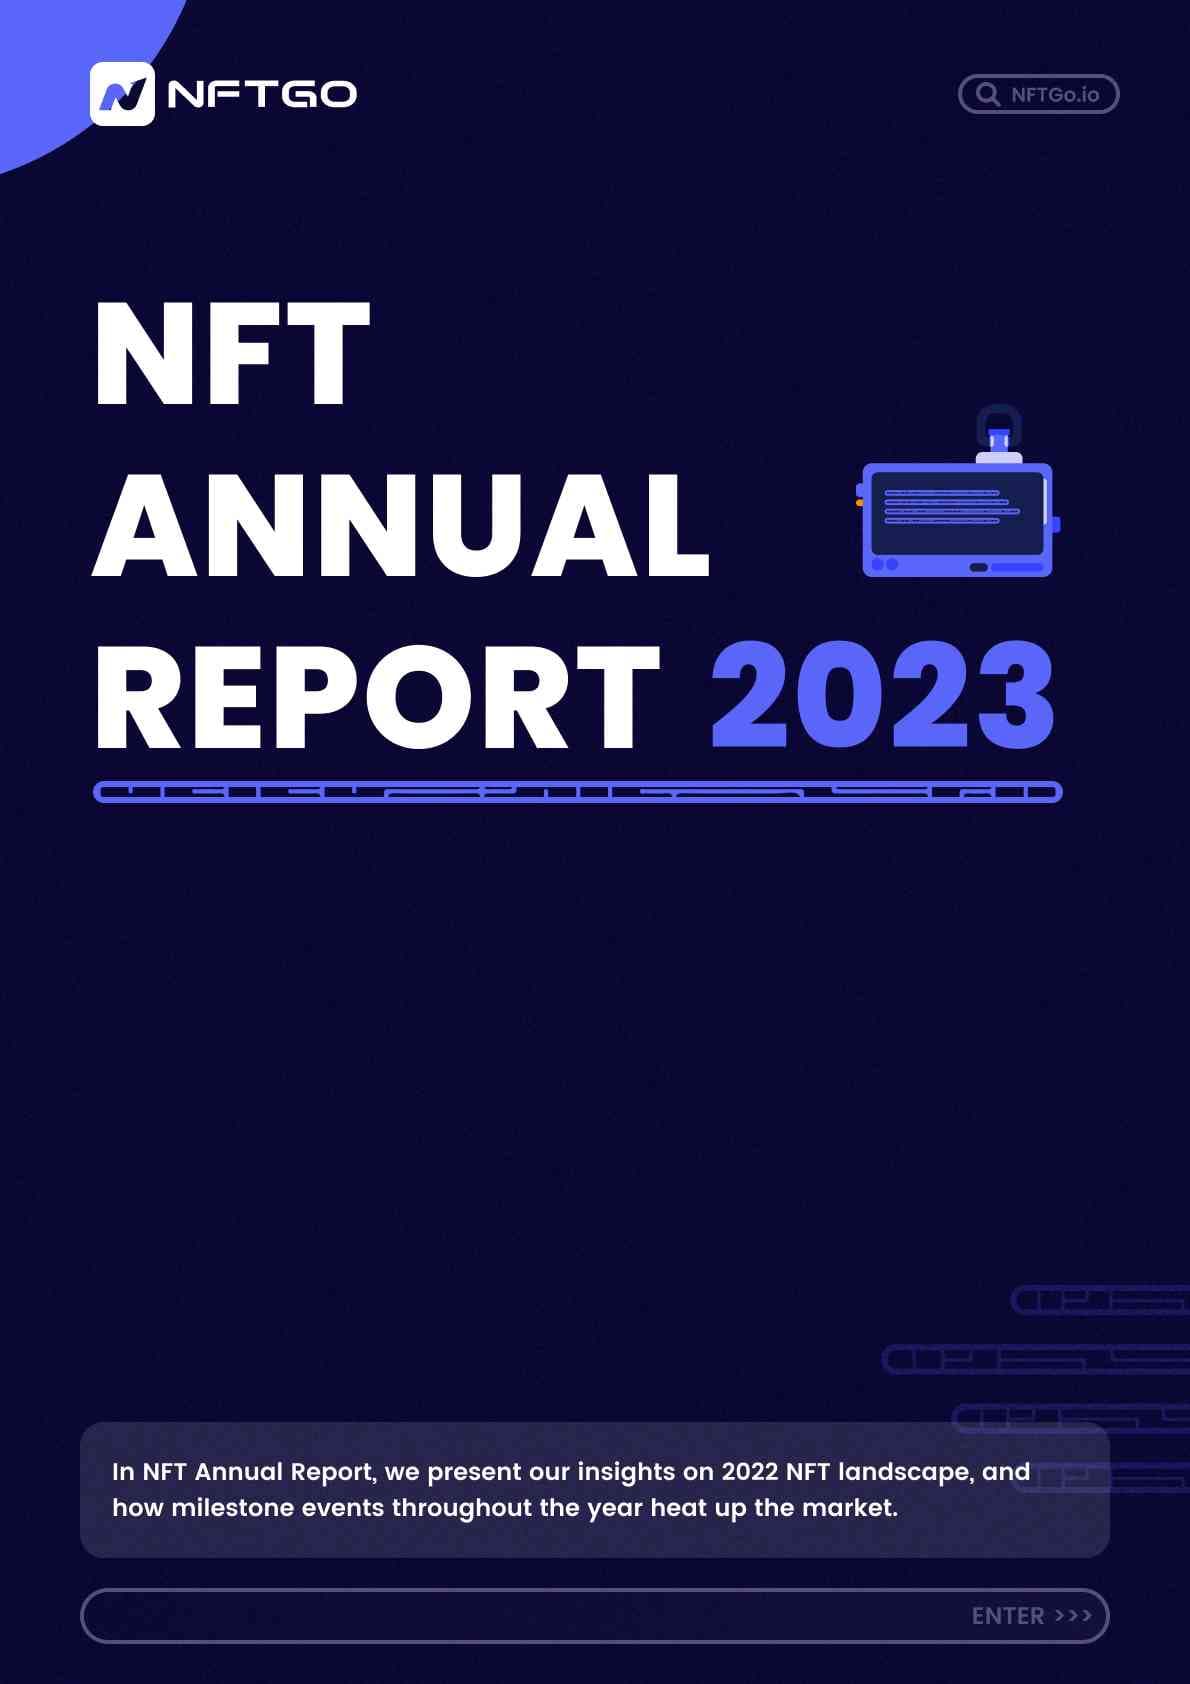 https://static.nftgo.io/annual-report/2023/front-page-new.jpeg